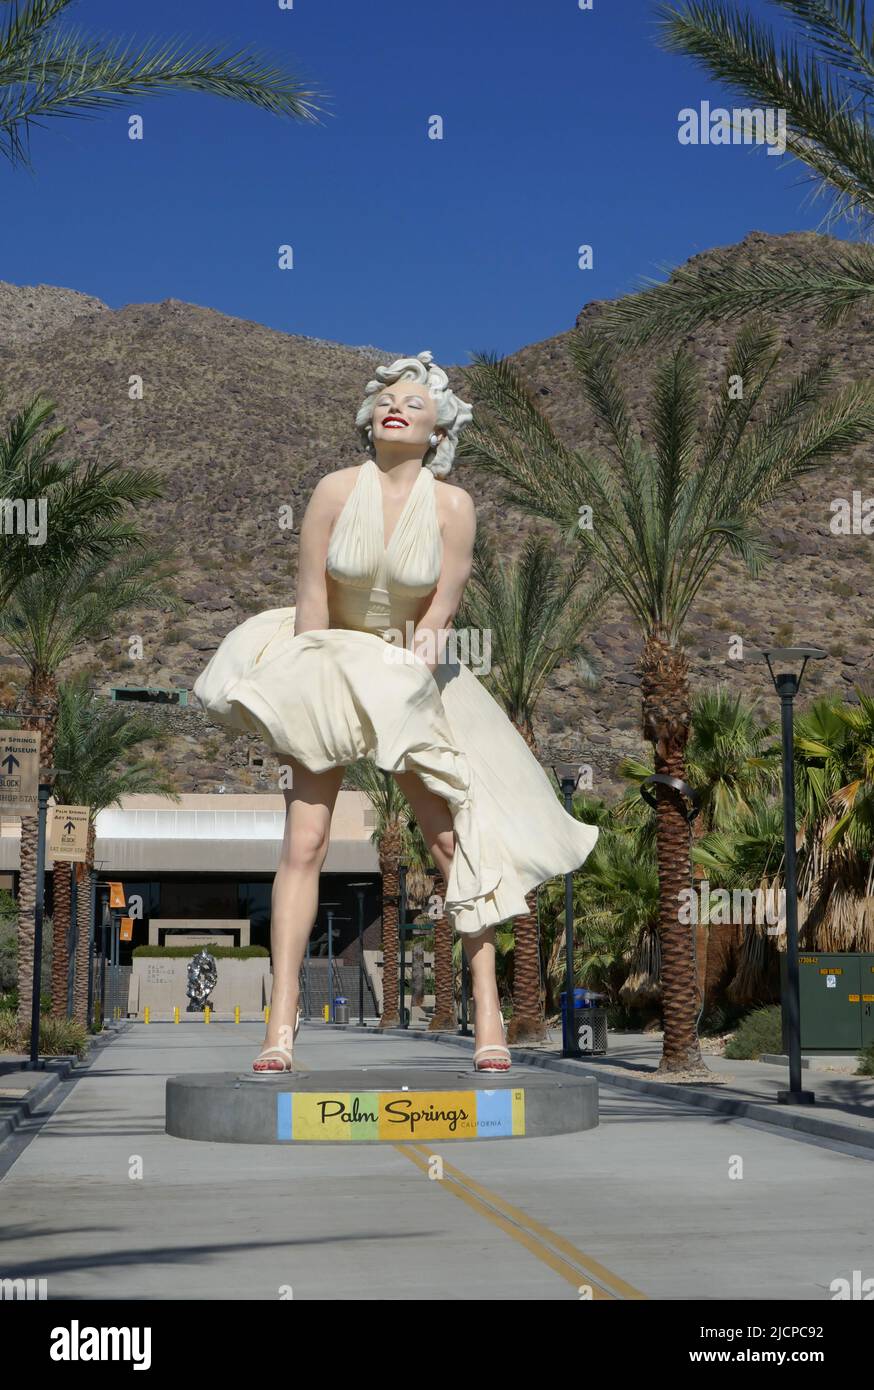 Getty Images Gallery - Marilyn Monroe at her home in Palm Springs,  California, during a photo shoot with Baron in 1954. Continuing our  #Modernismweek appreciation, our next Palm Springs stop is the